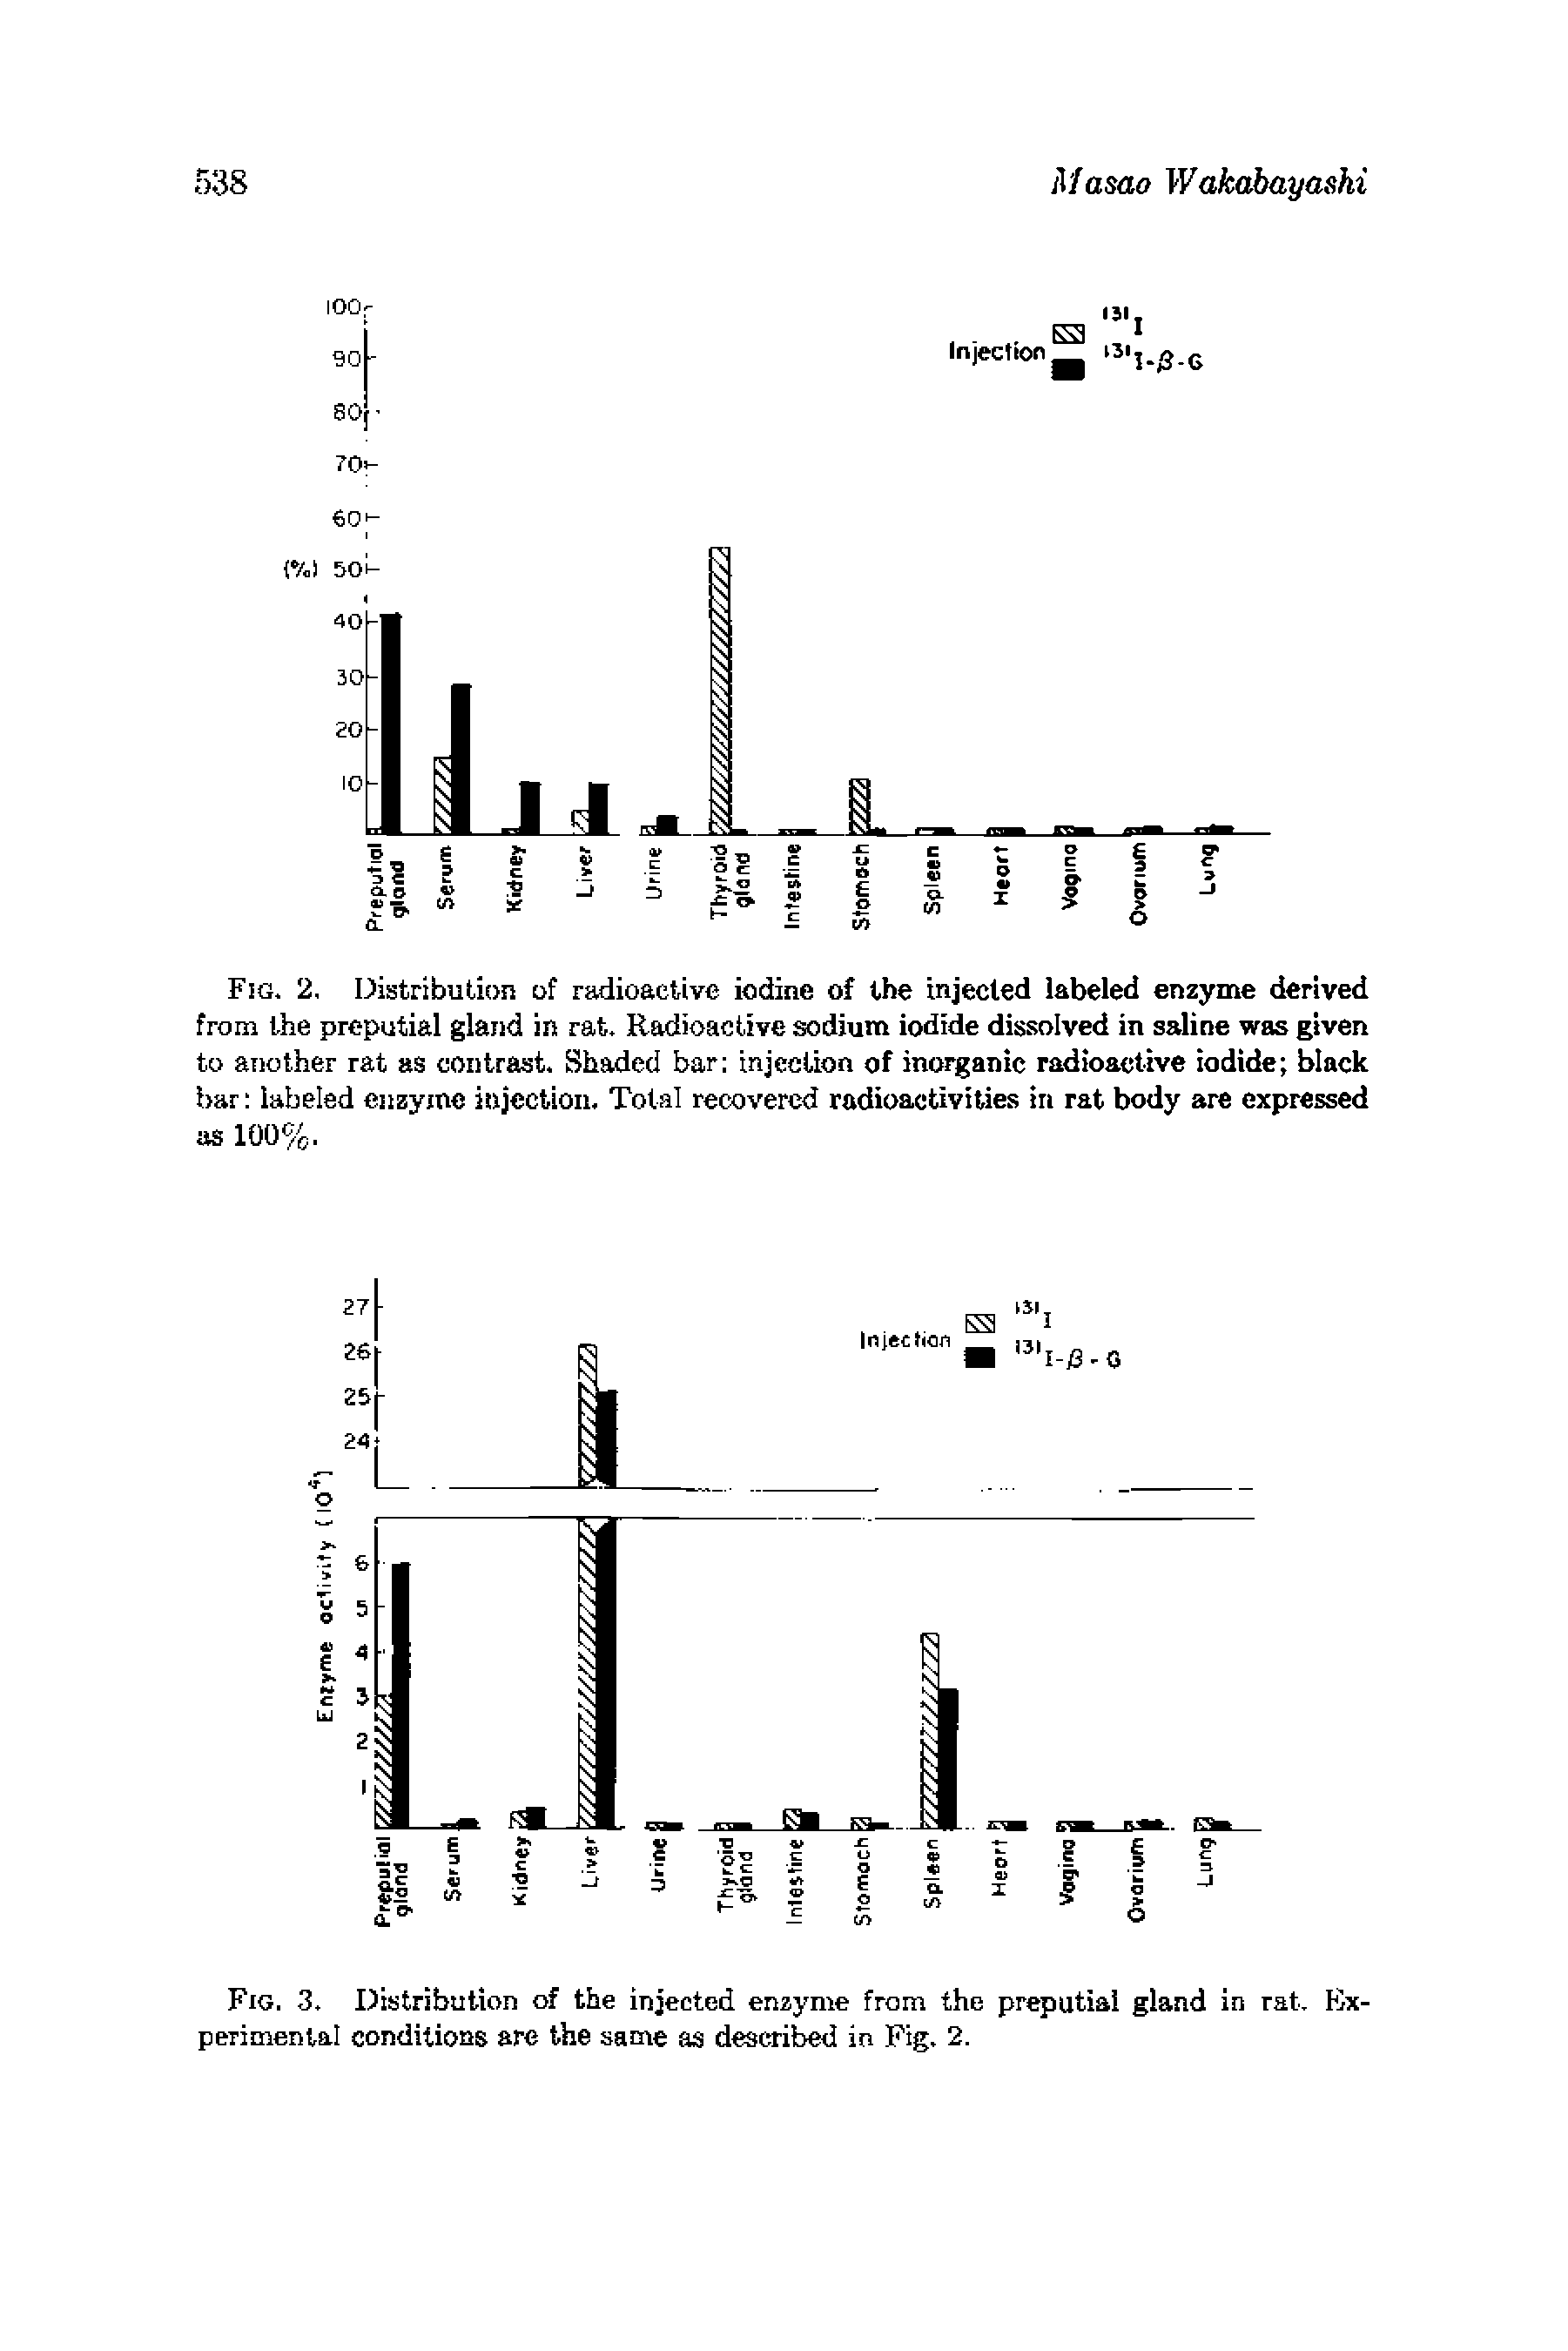 Fig. 2. Distribution of radioactive iodiiie of the injected labeled enzyme derived from the preputial gland in rat. Radioactive sodium iodide dissolved in saline was given to another rat as contrast. Shaded bar injection of incn anic radioactive iodide black bar labeled enzyme injection. Total recovered radioactiviUes in rat body are expressed as 100%.